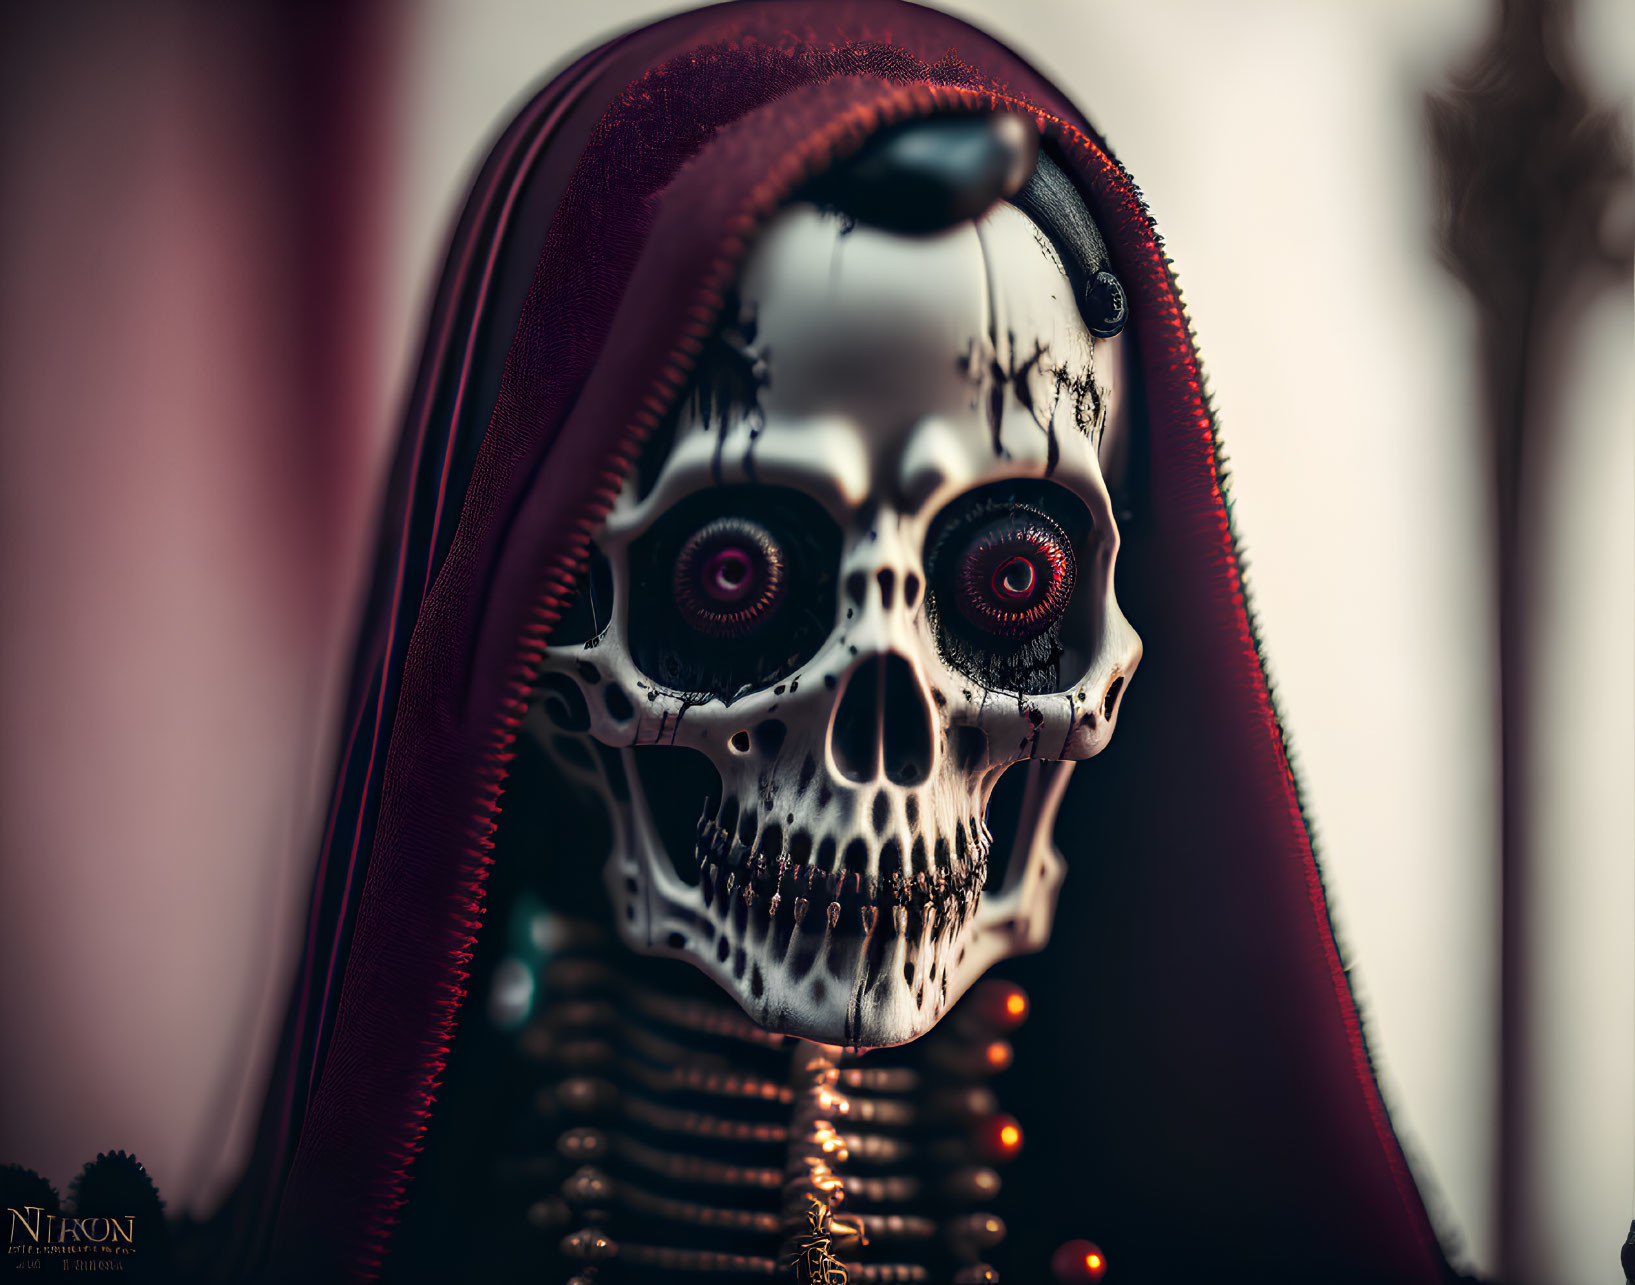 Skull with Hollow Eye Sockets in Red Hooded Cloak